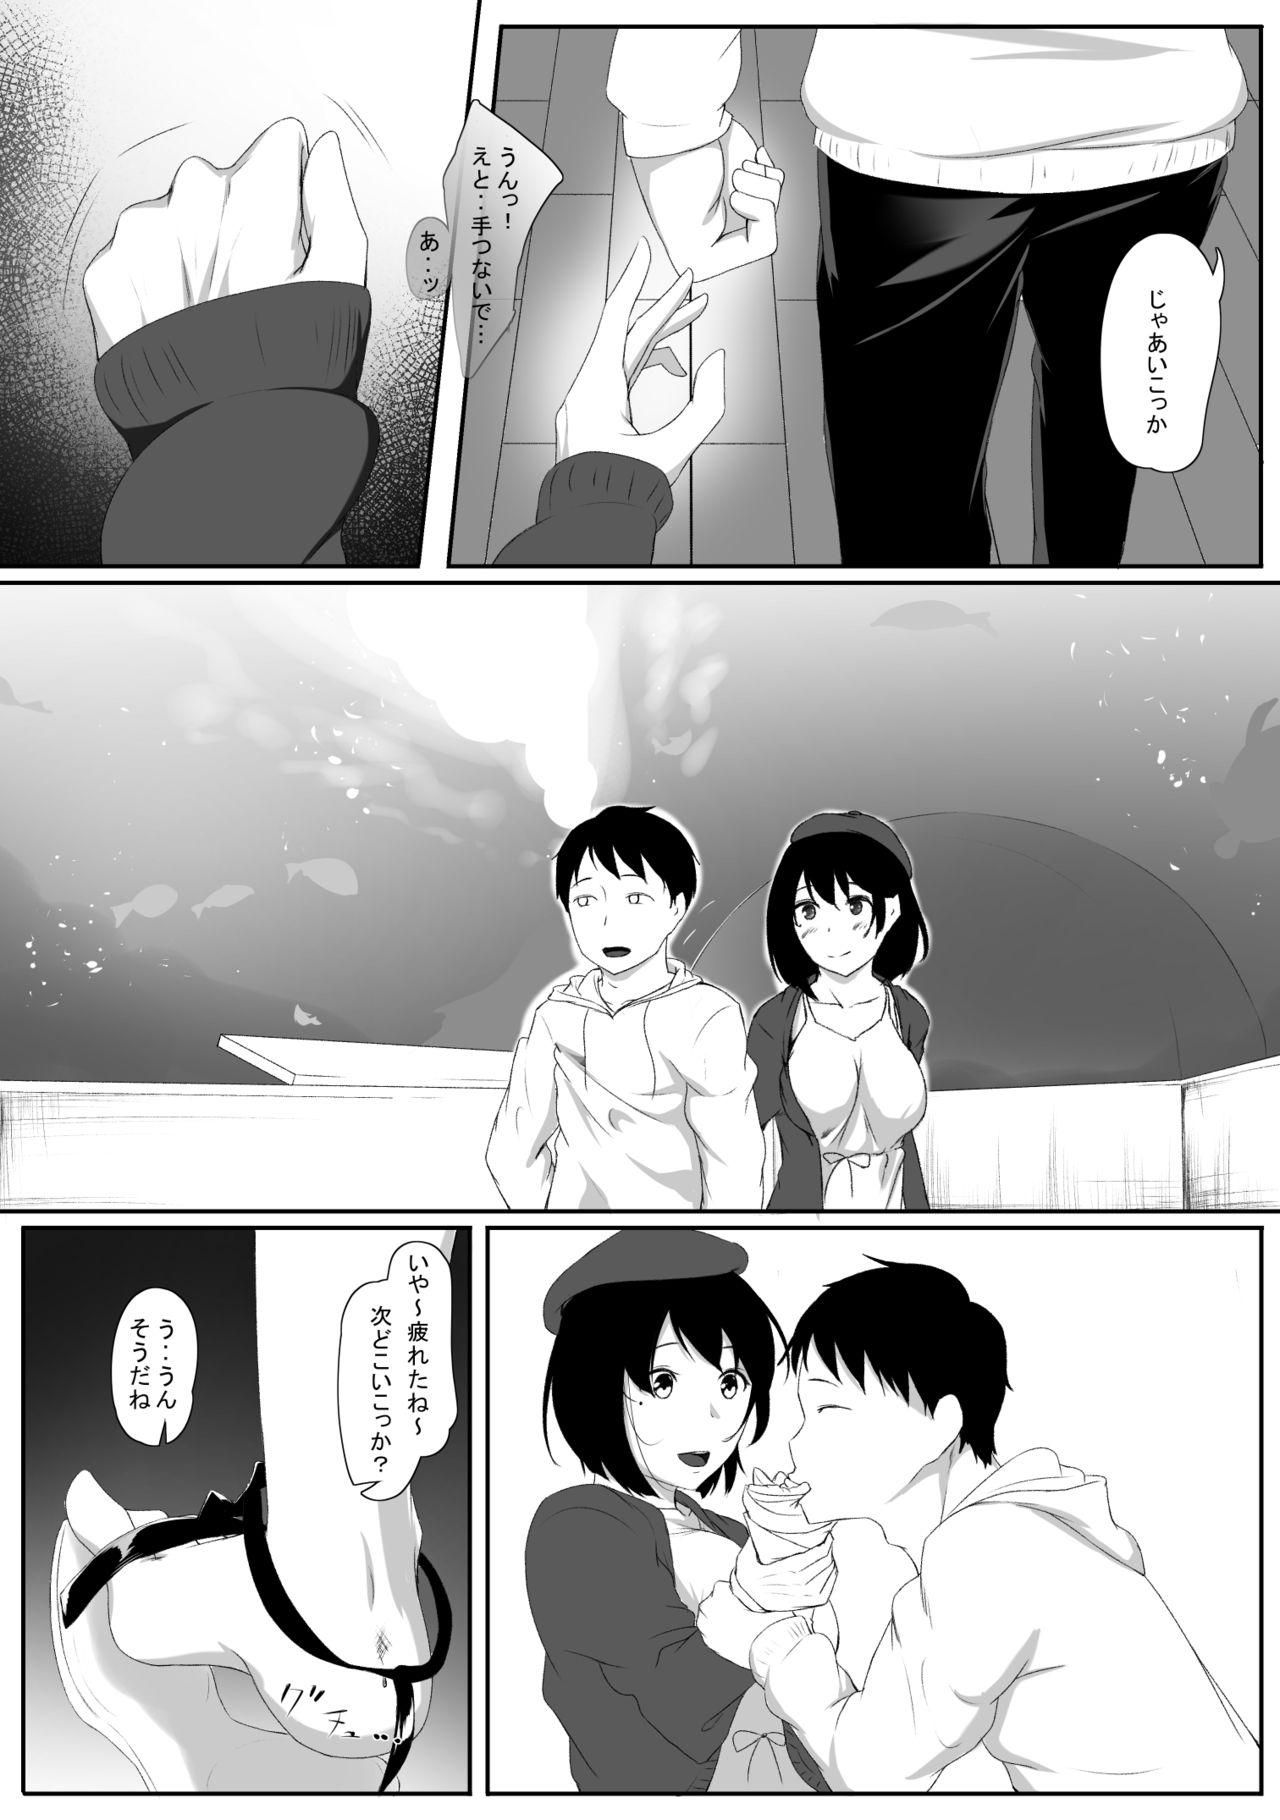 Unshaved はじめてのひめごと… ～真実の気持ち編～ - Original Caliente - Page 8